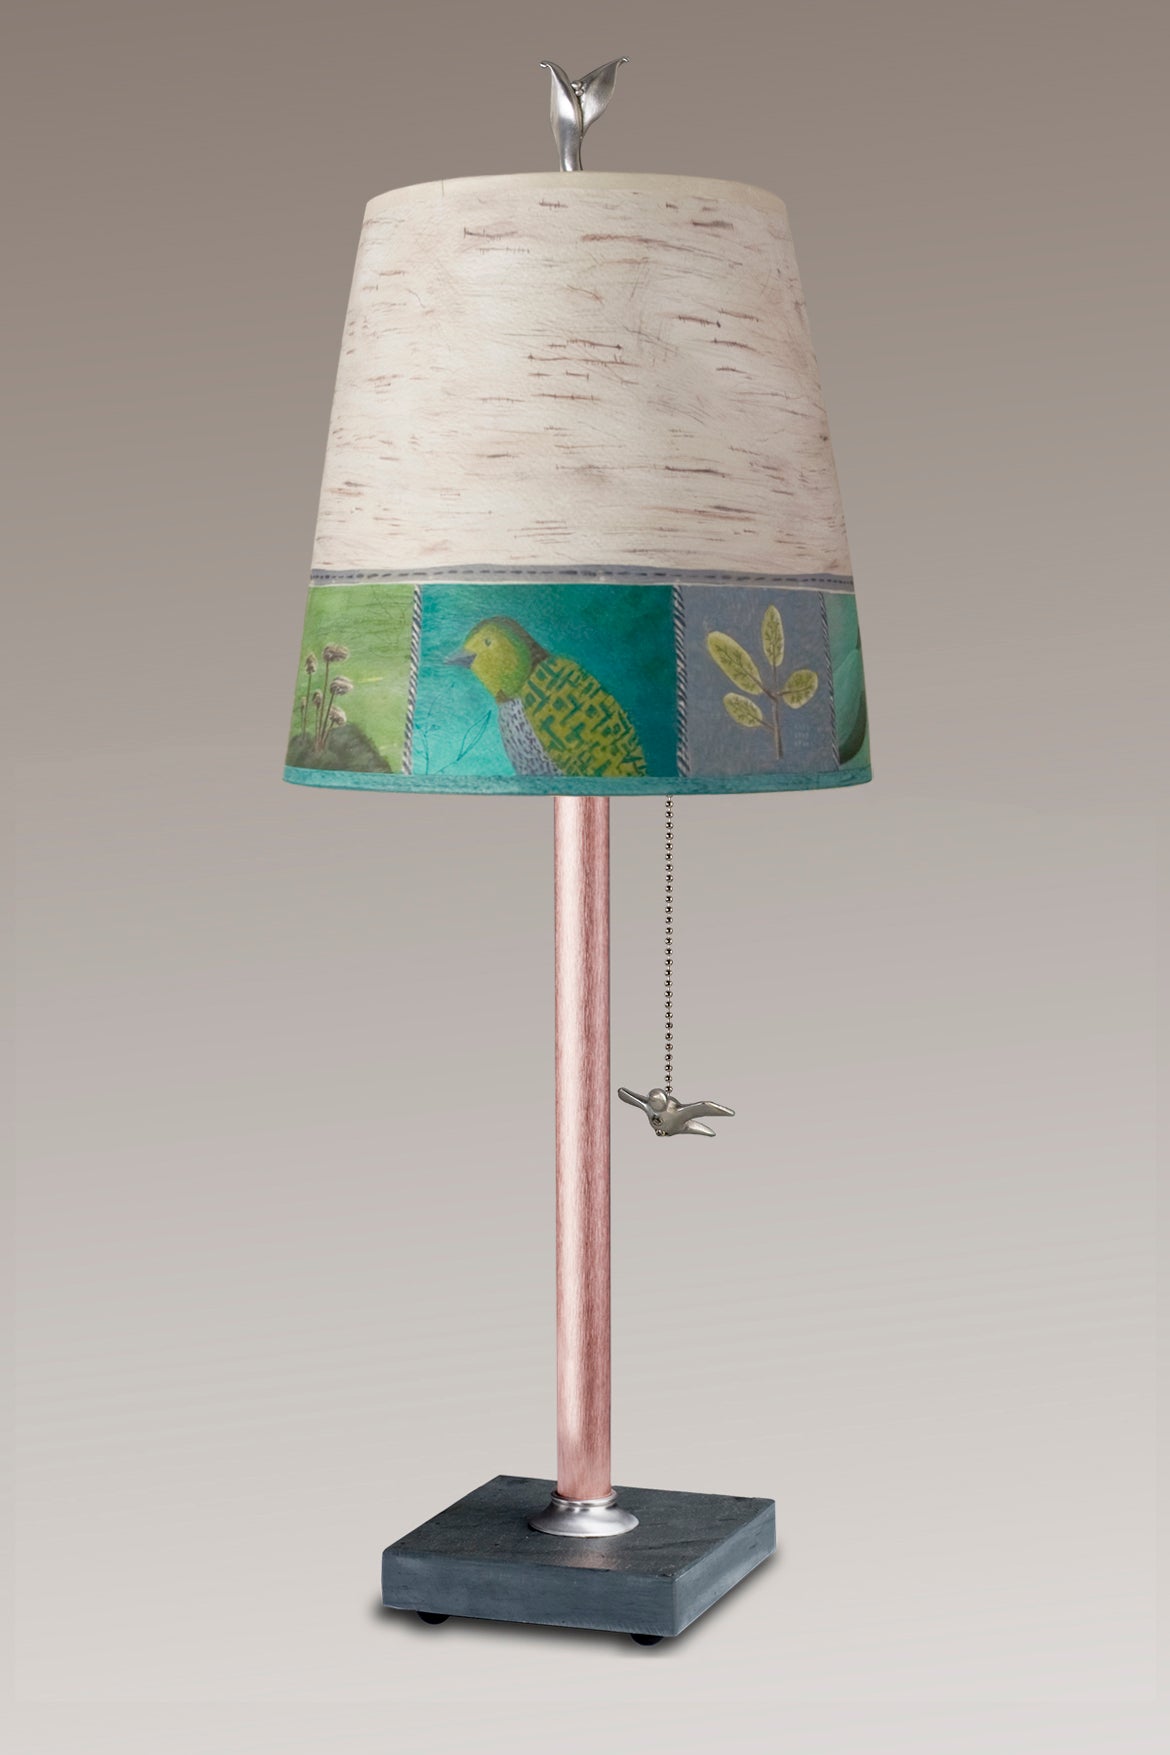 Janna Ugone & Co Table Lamps Copper Table Lamp with Small Drum in Woodland Trails in Birch